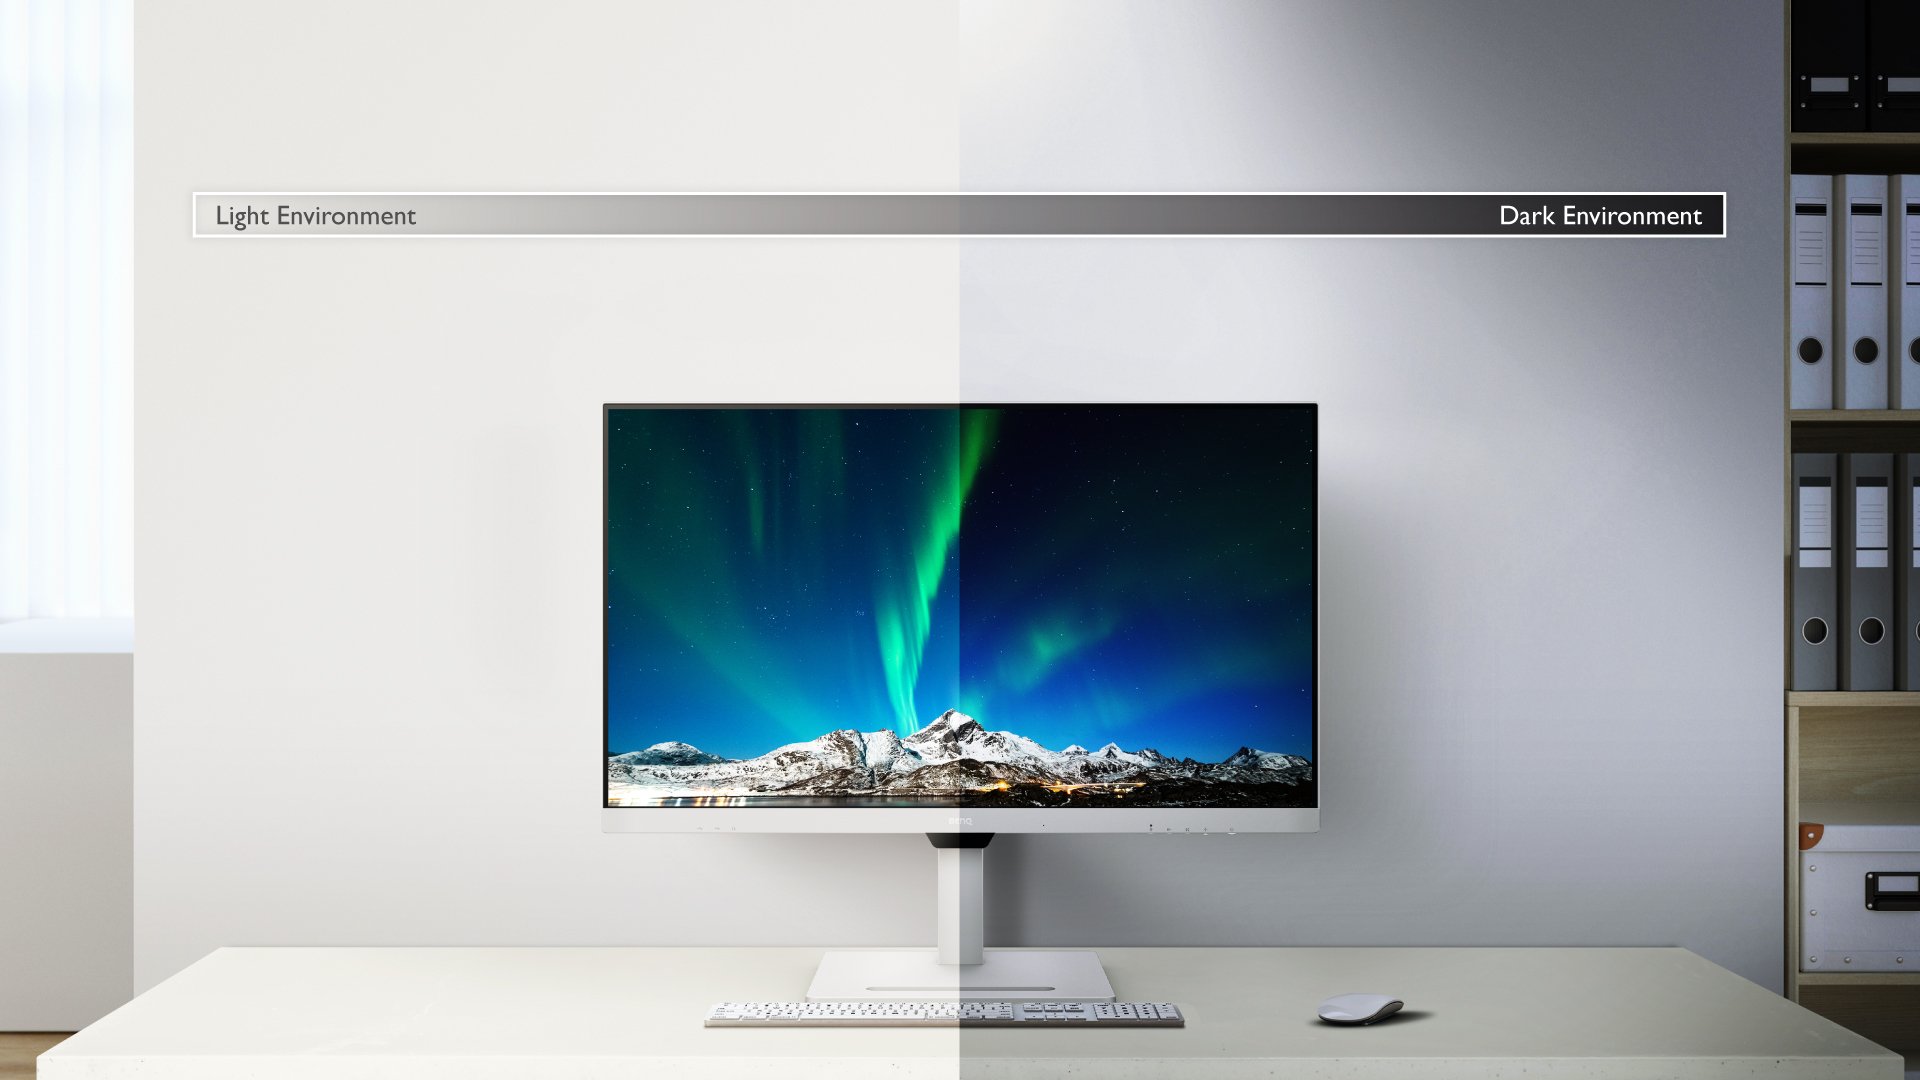 BenQ BL3290QT Brightness Intelligence actively adjusts screen brightness for comfortable viewing experiences and Brightness Intellignece Gen.2 allows customizable brightness.